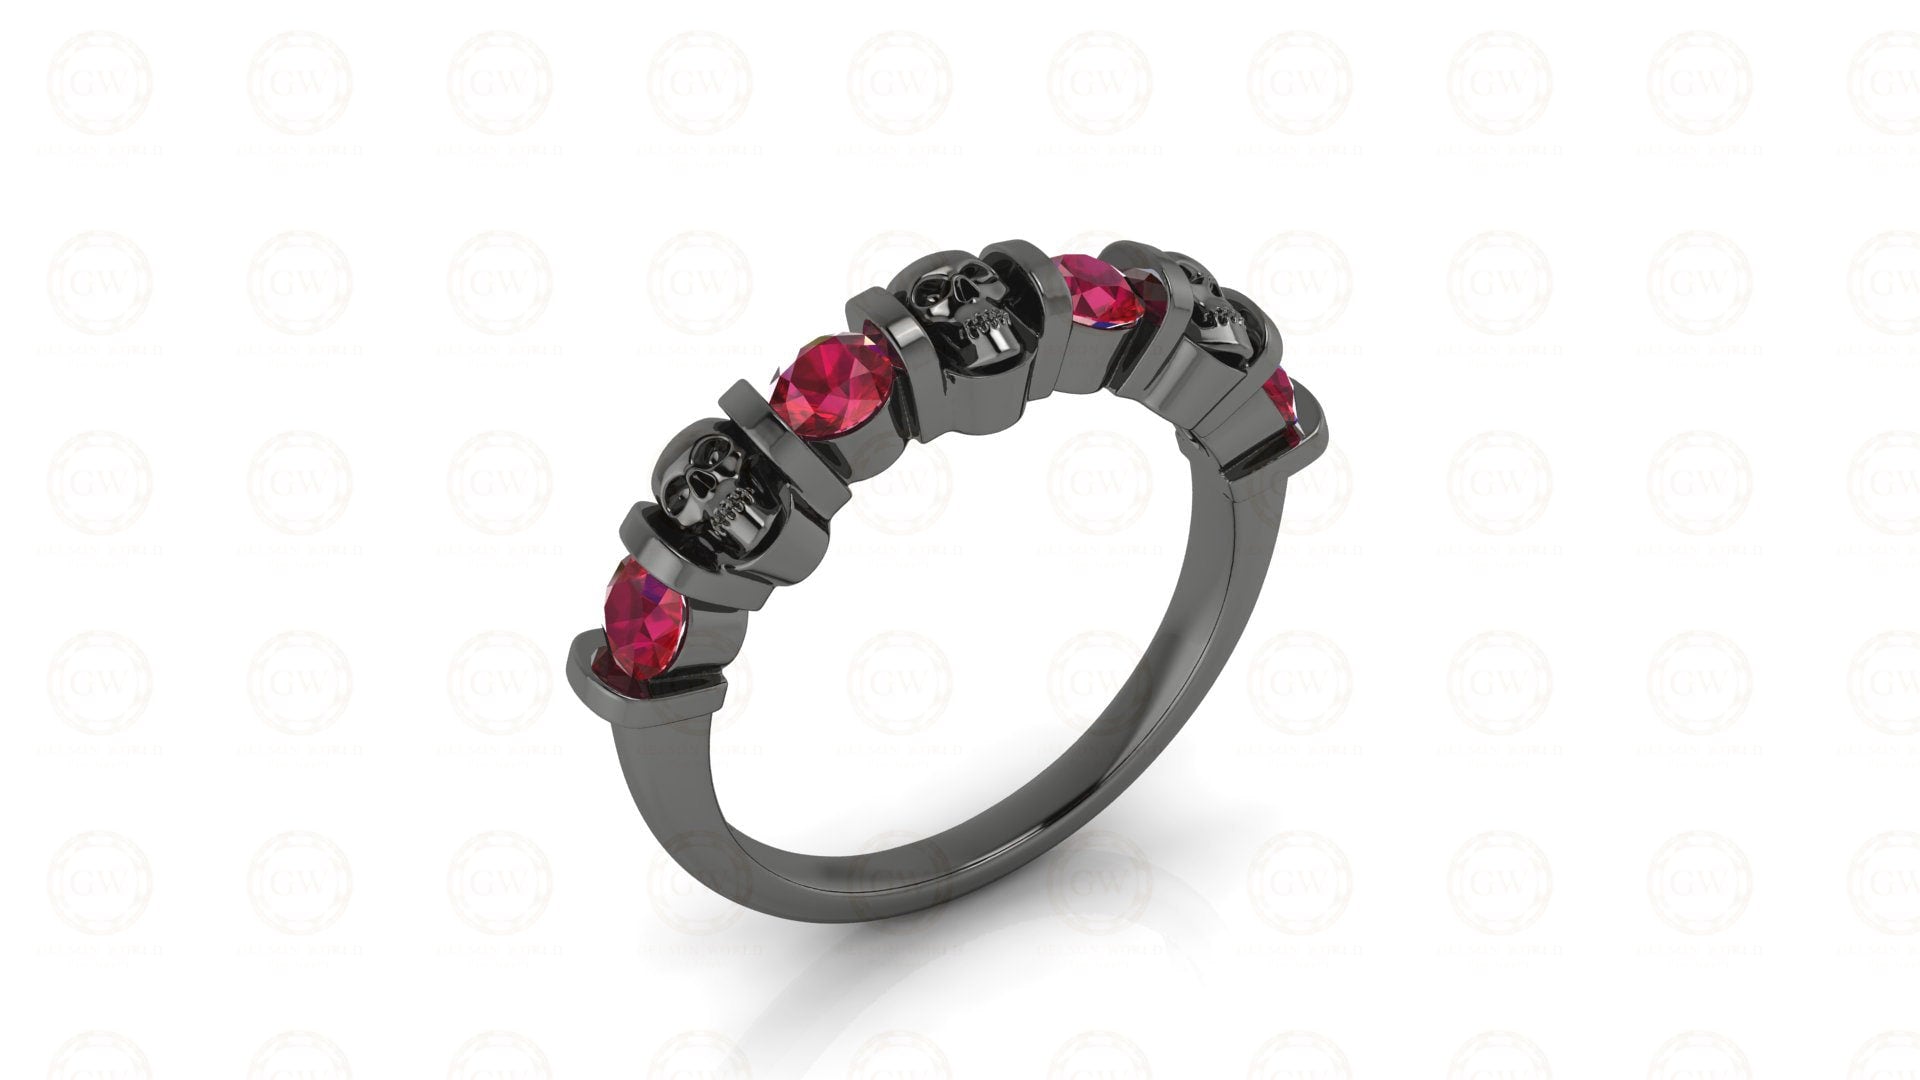 0.65 Ct Unique Gothic Skull 4 Stone CZ Engagement Wedding Ring, Birthstone July Ruby gemstone Women ring, Sterling Silver, Gift for her